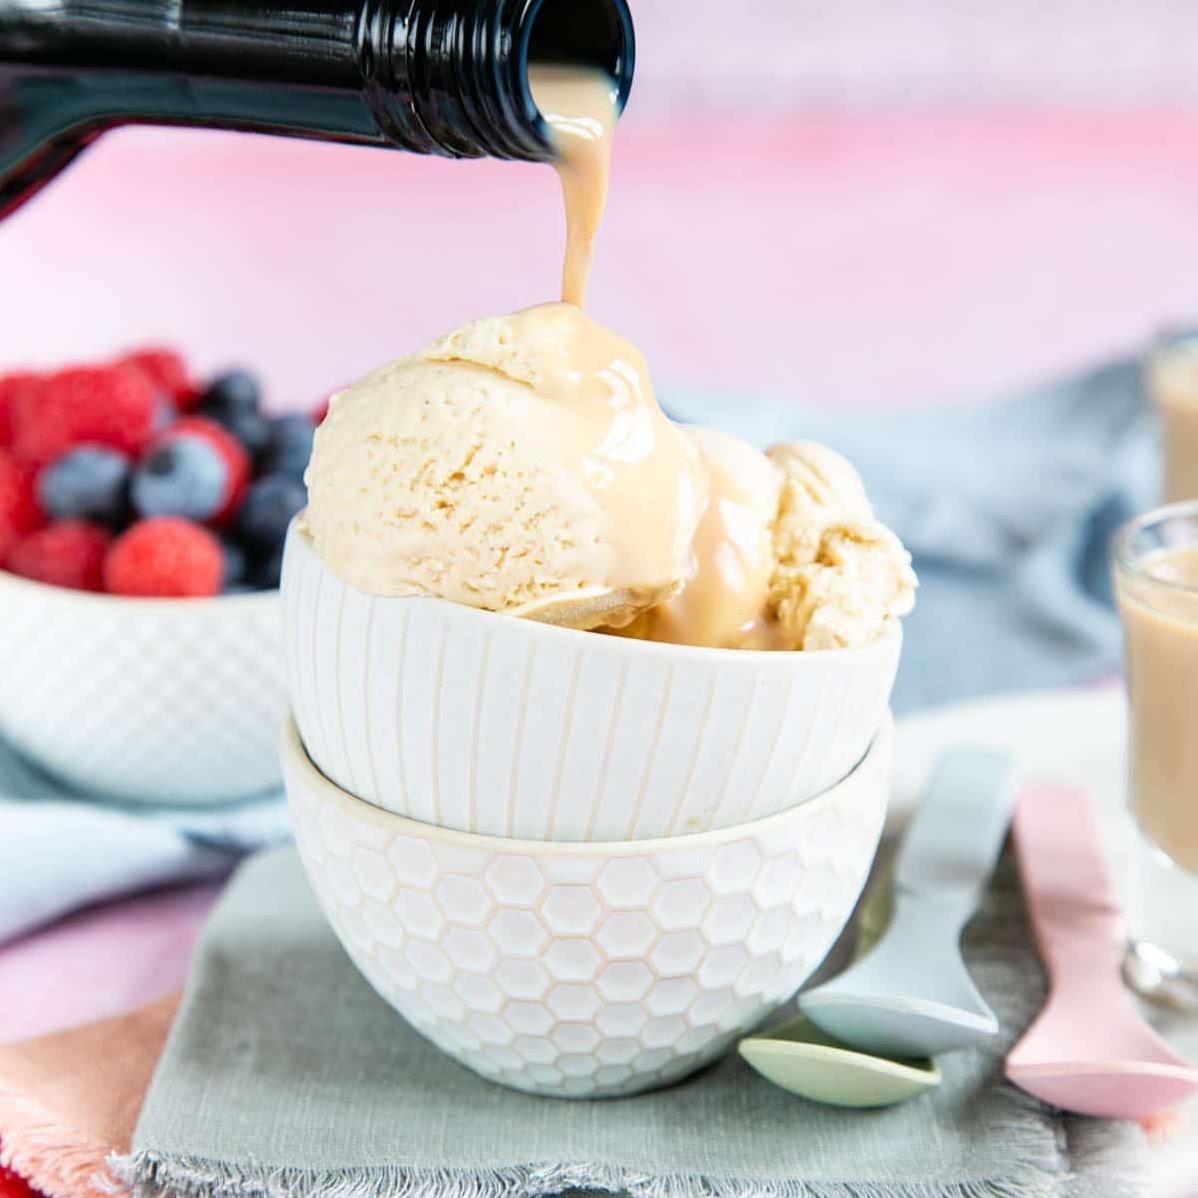  This delicious Irish ice cream treat is the perfect way to end any meal